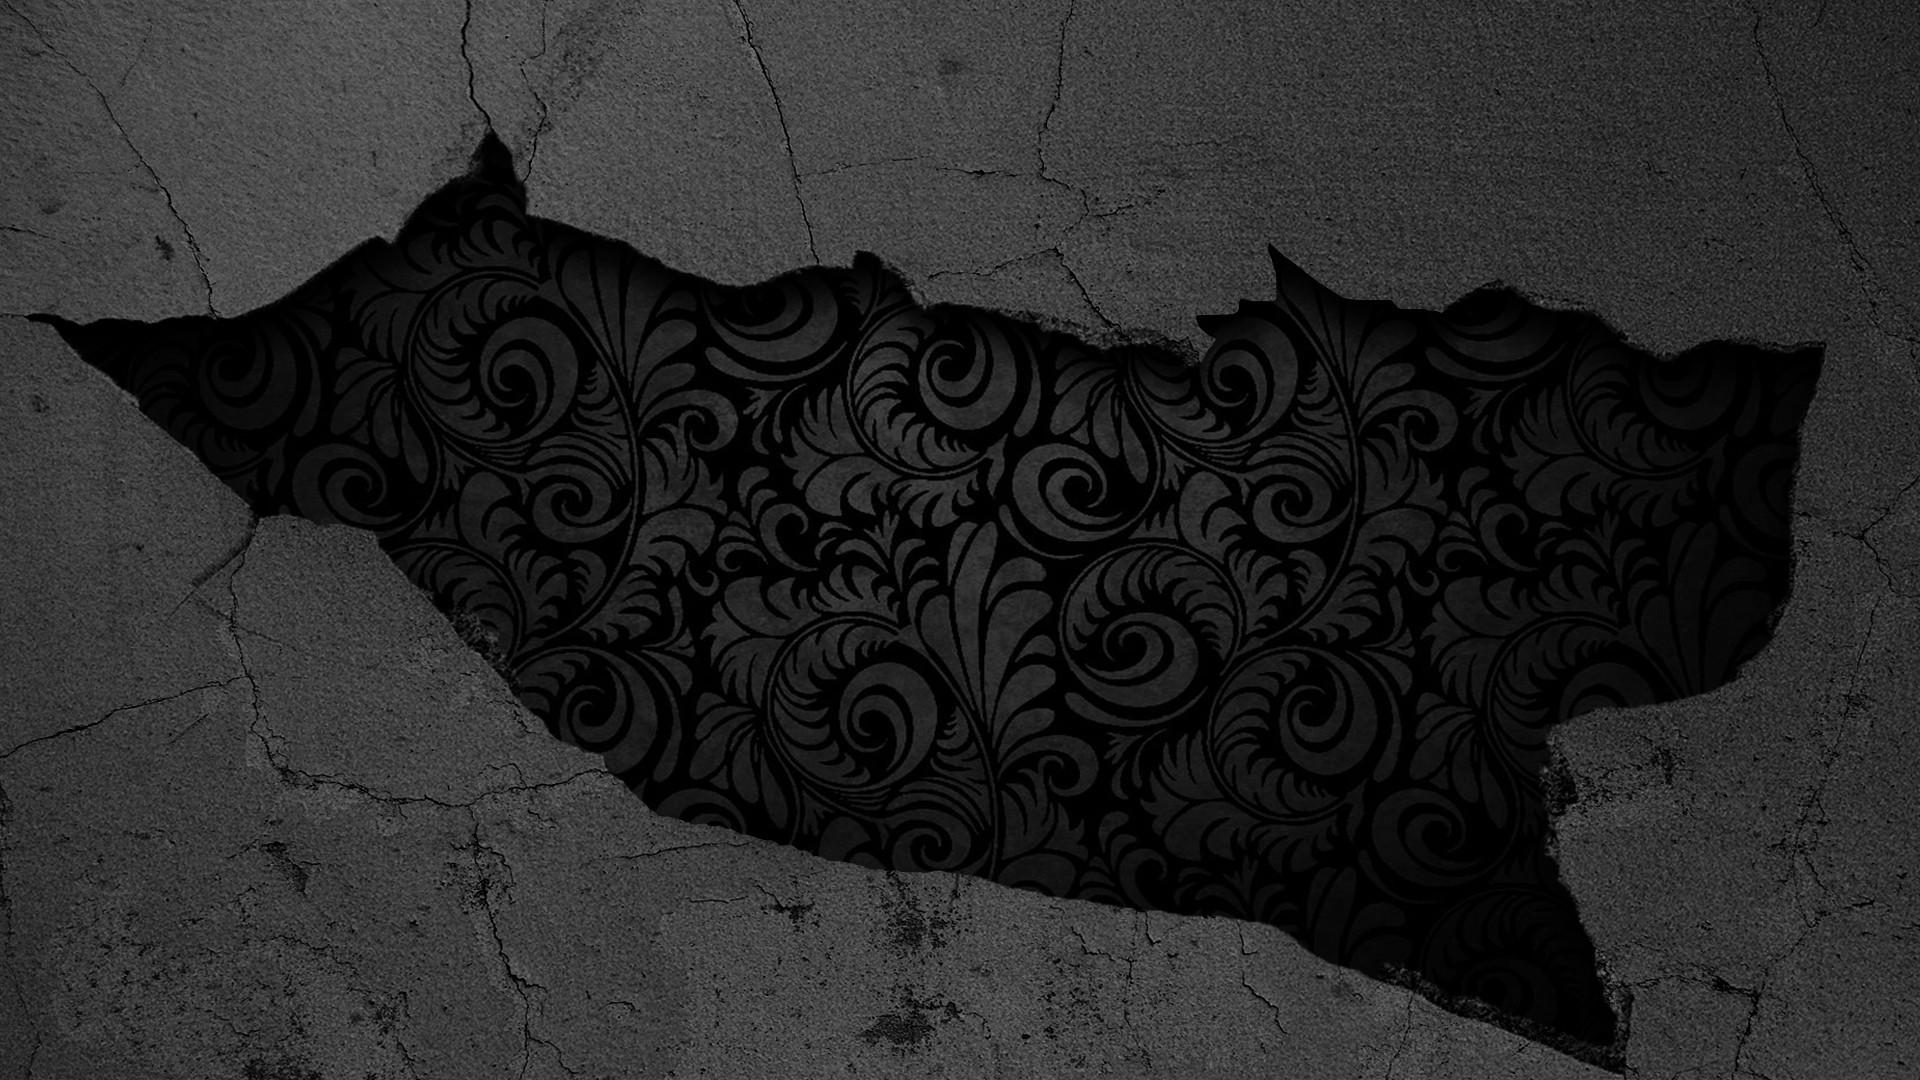 Black and white flowers textures crack wallpaper